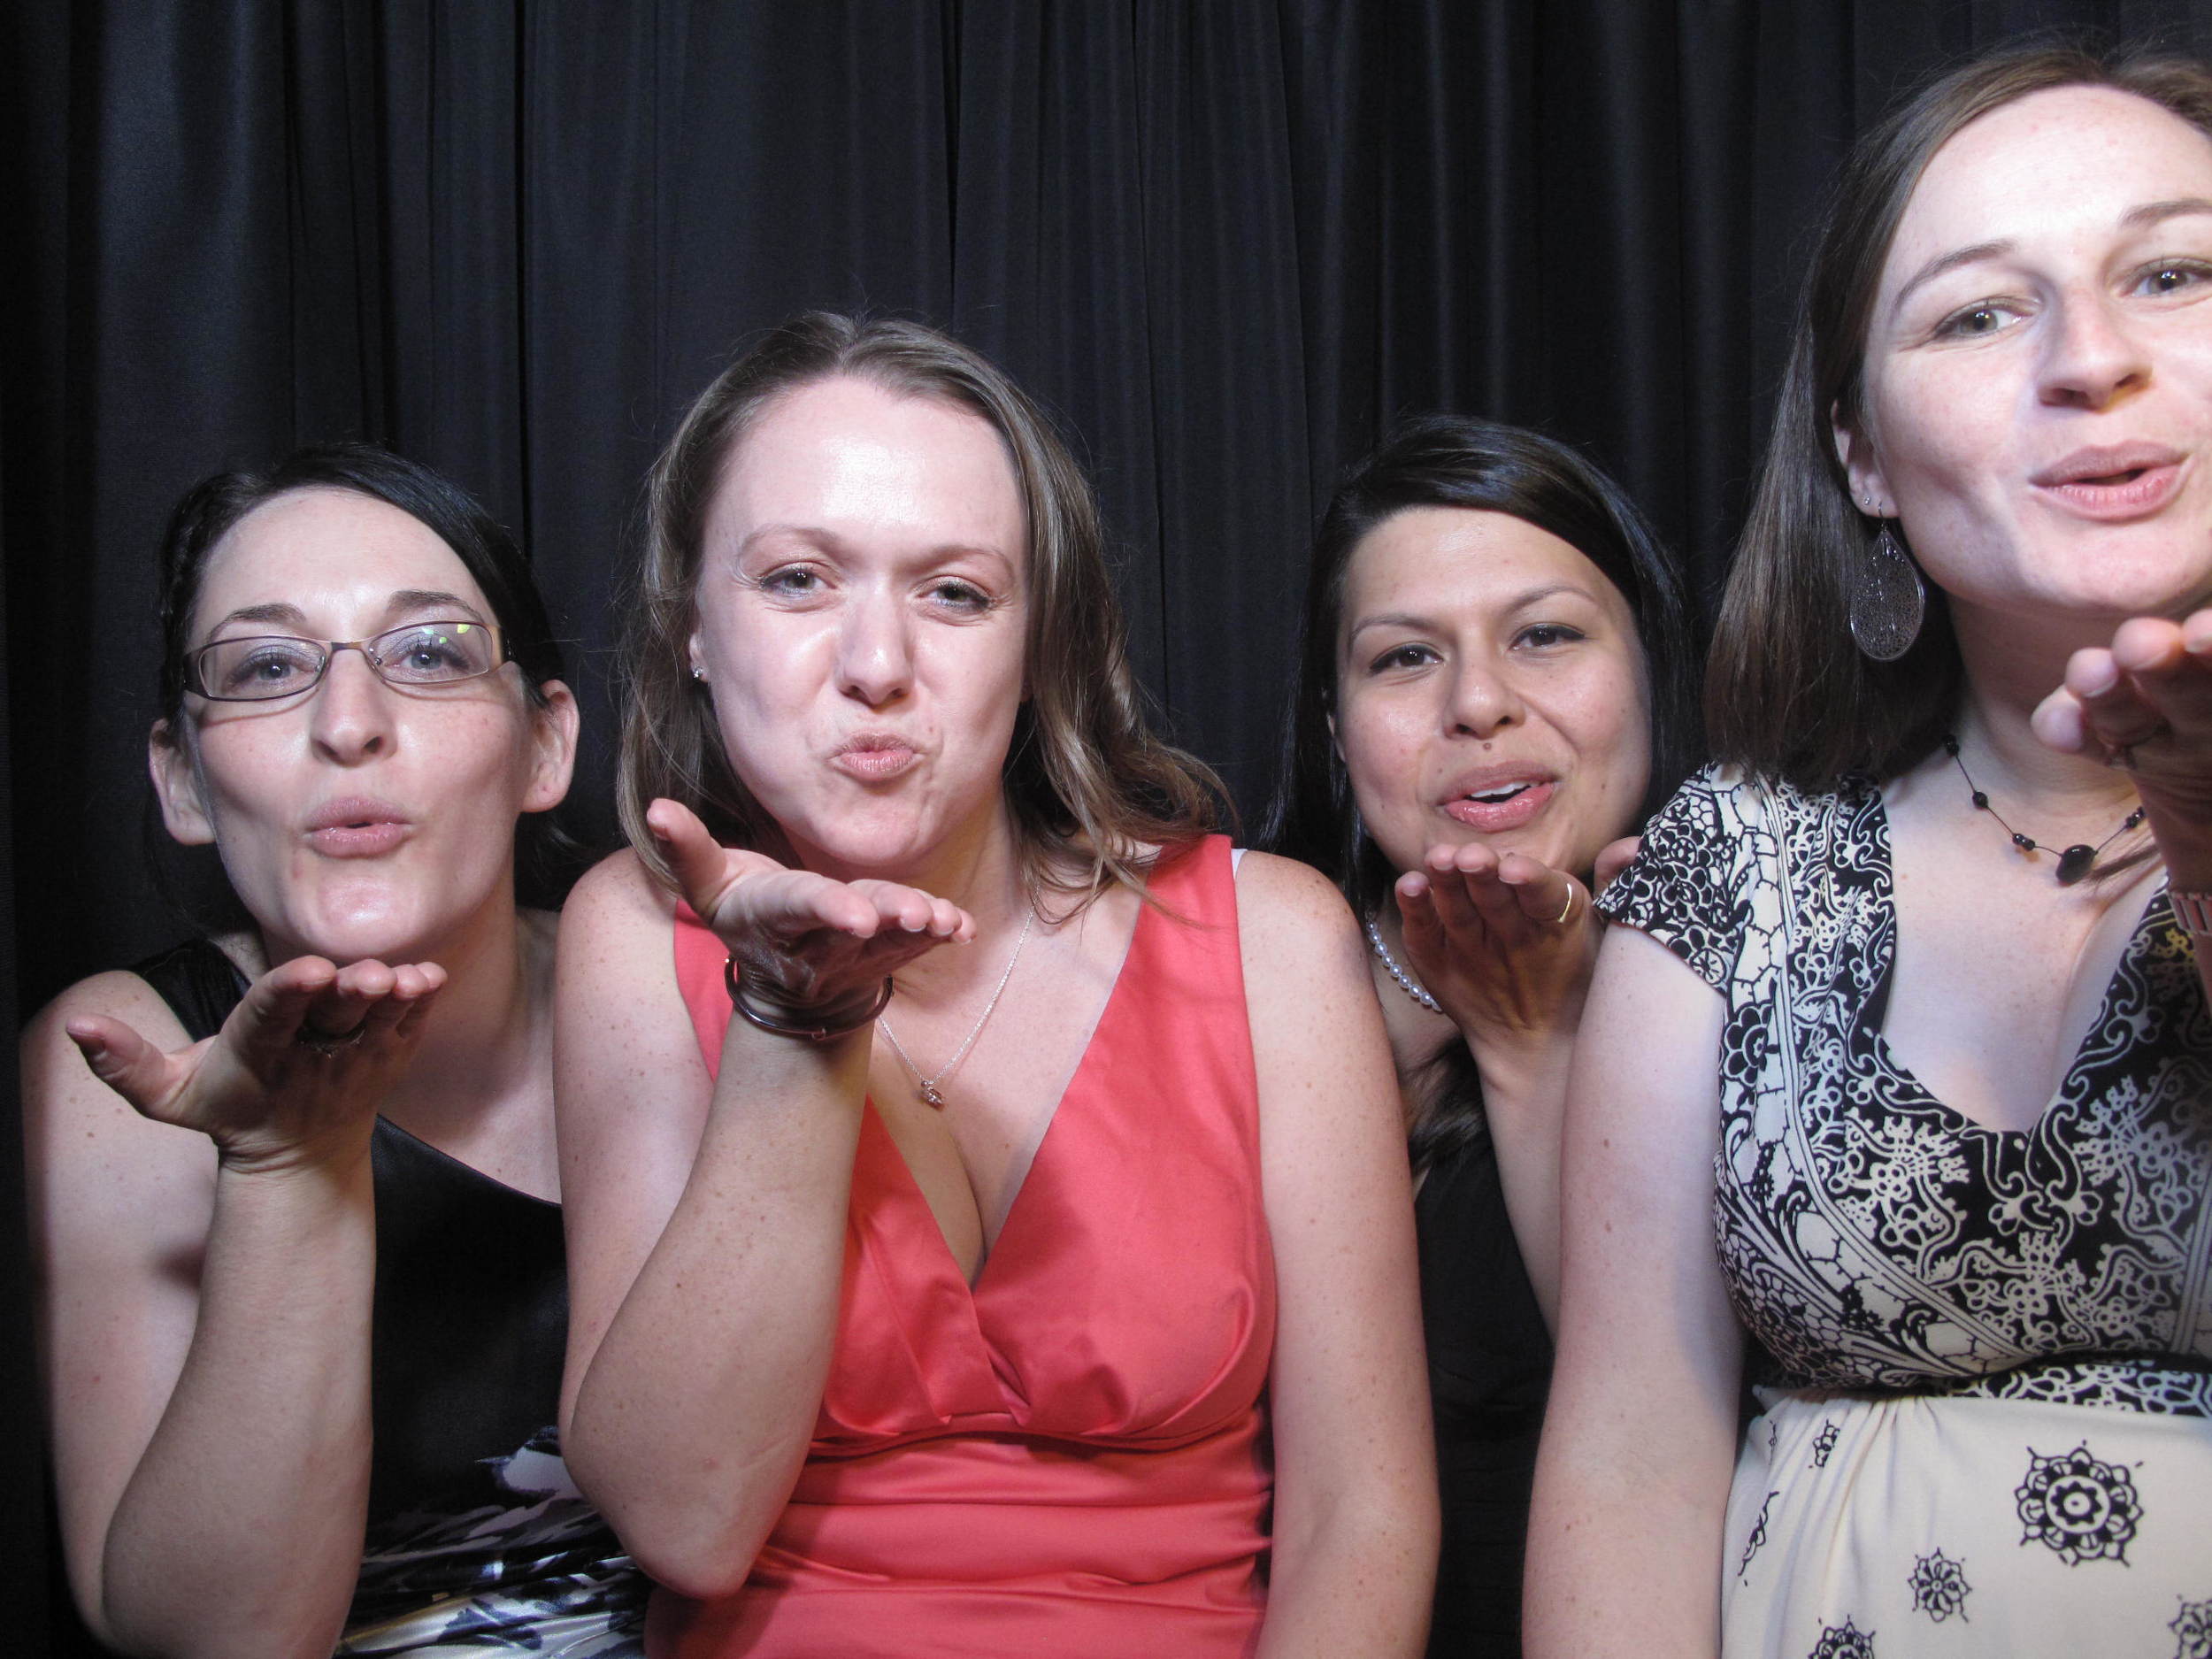 Snapshot Photobooths at Southgate Manor in Freehold, New Jersey